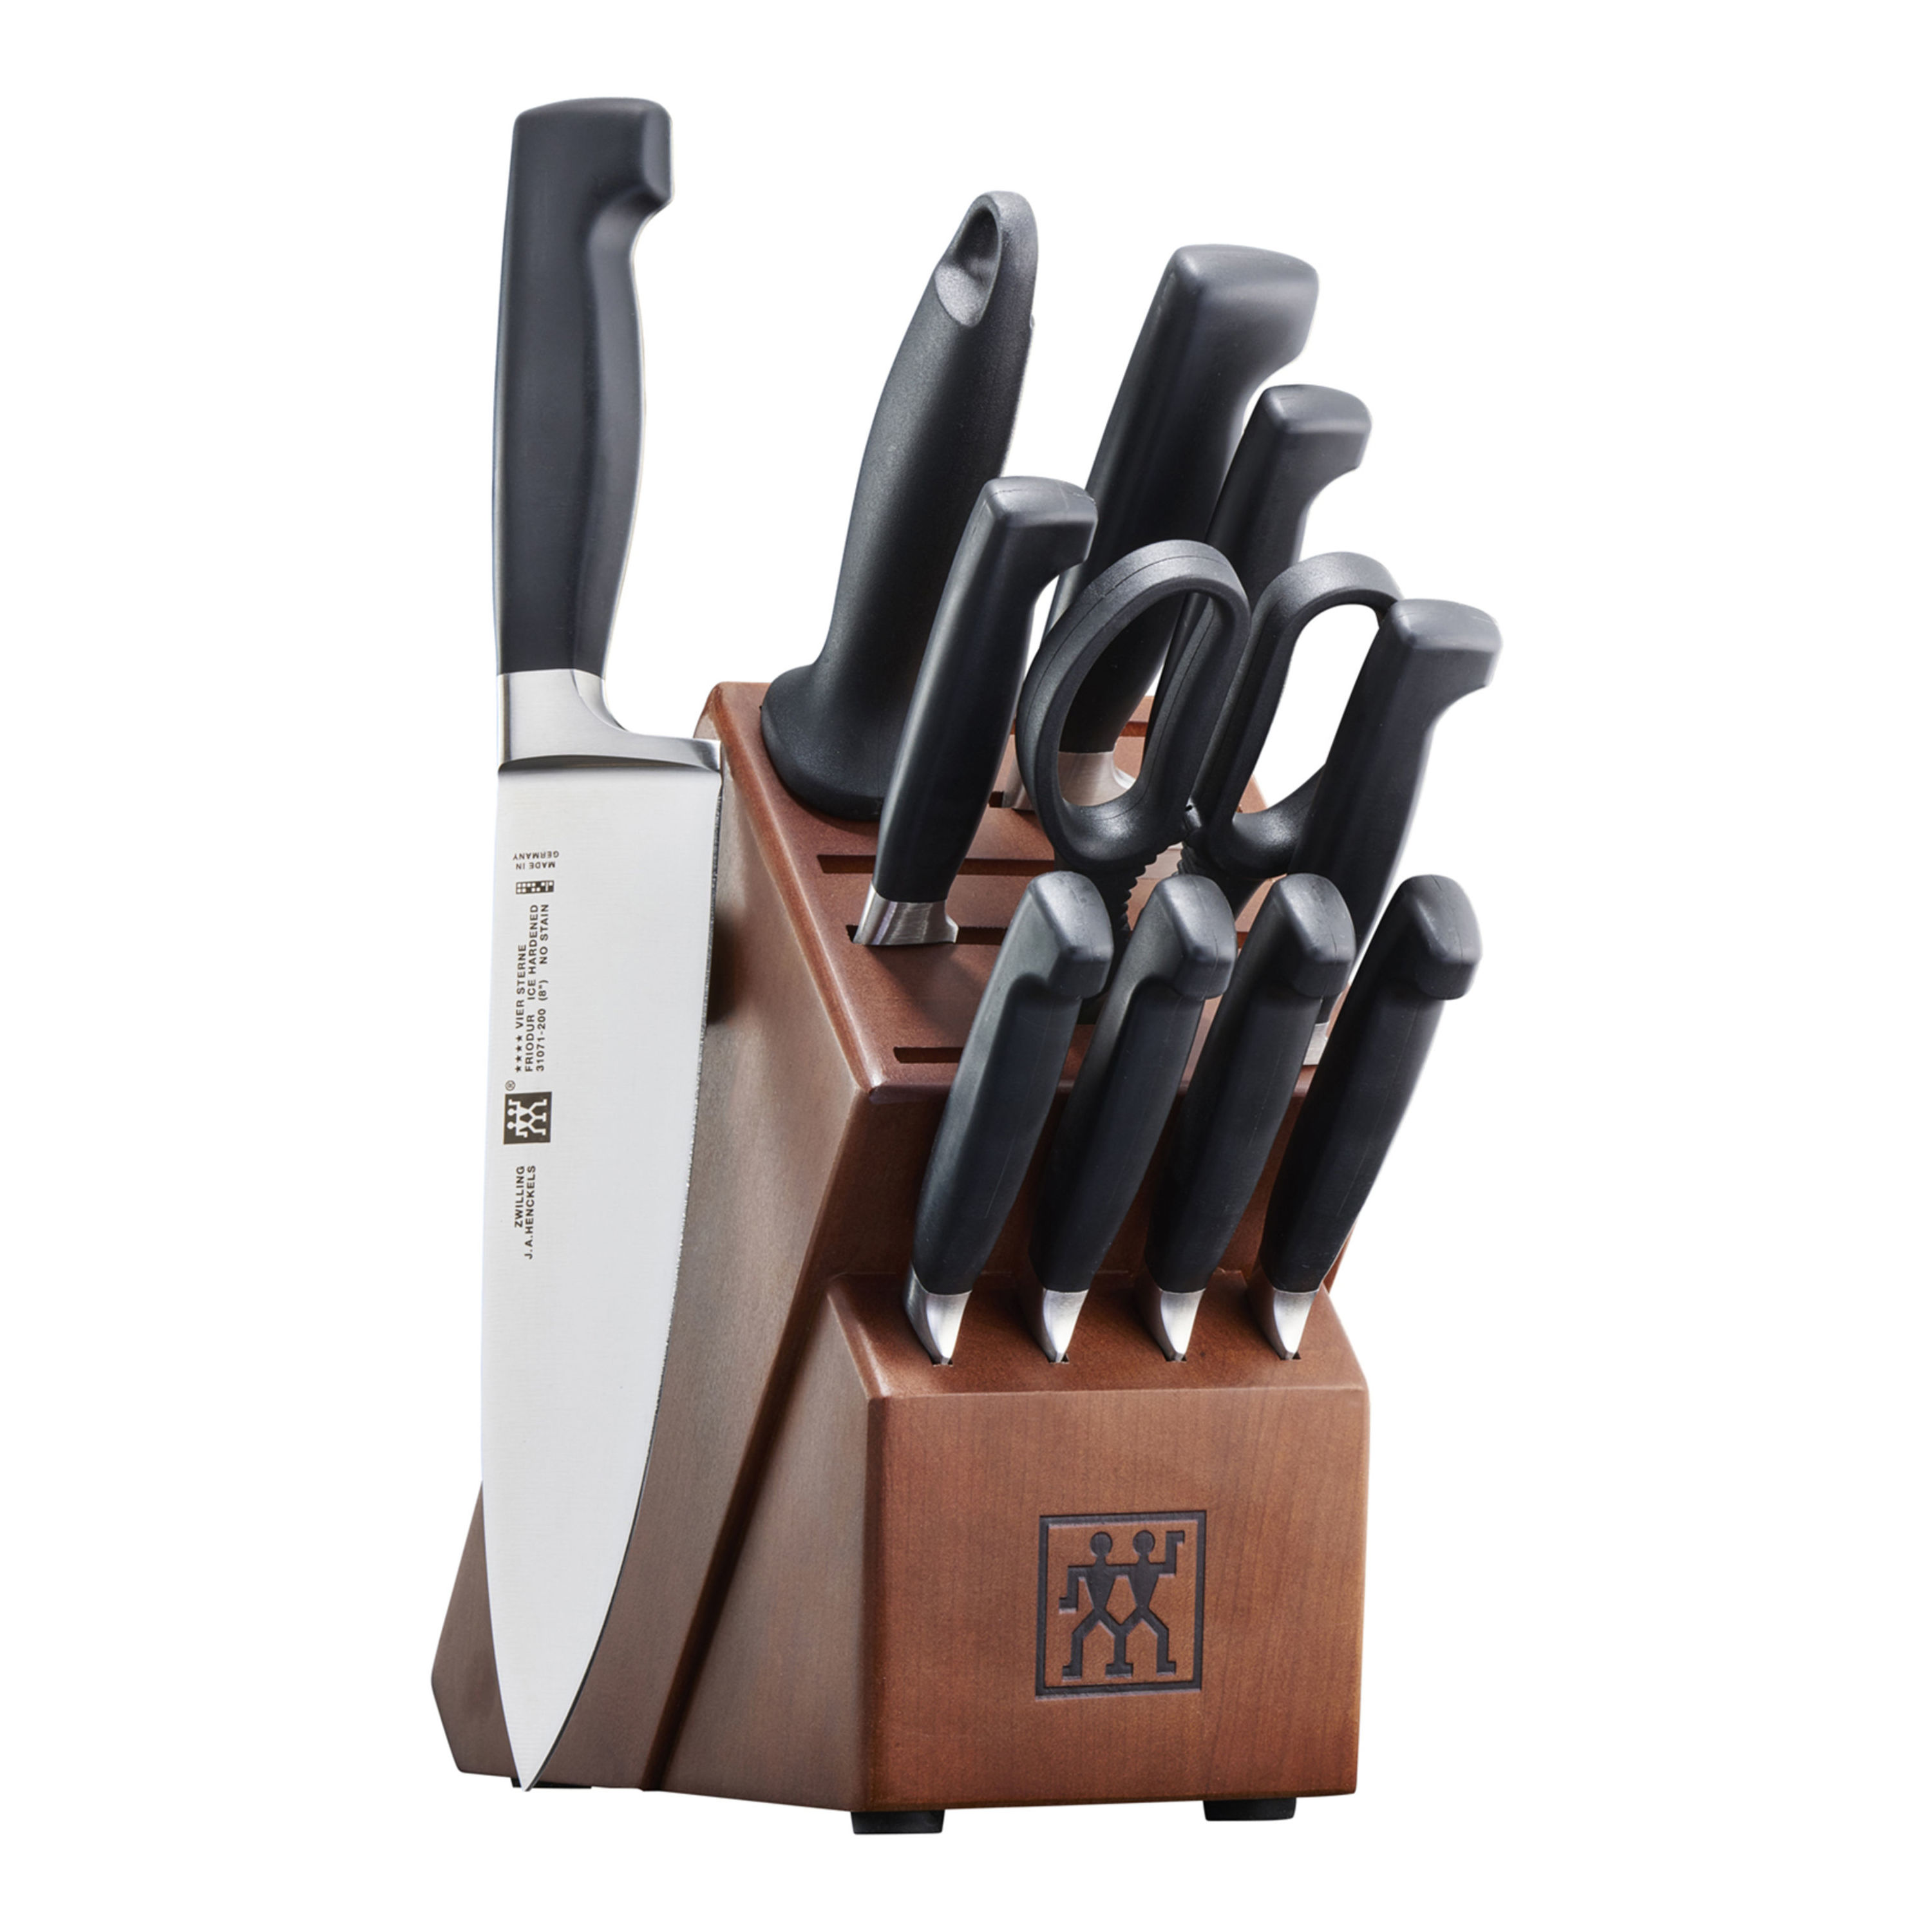 Zwilling Henckels International Solution 12-pc Knife Block Set - Stainless  Steel Blades, Plastic Handles, Dishwasher Safe - Includes Steak Knives &  Shears in the Cutlery department at